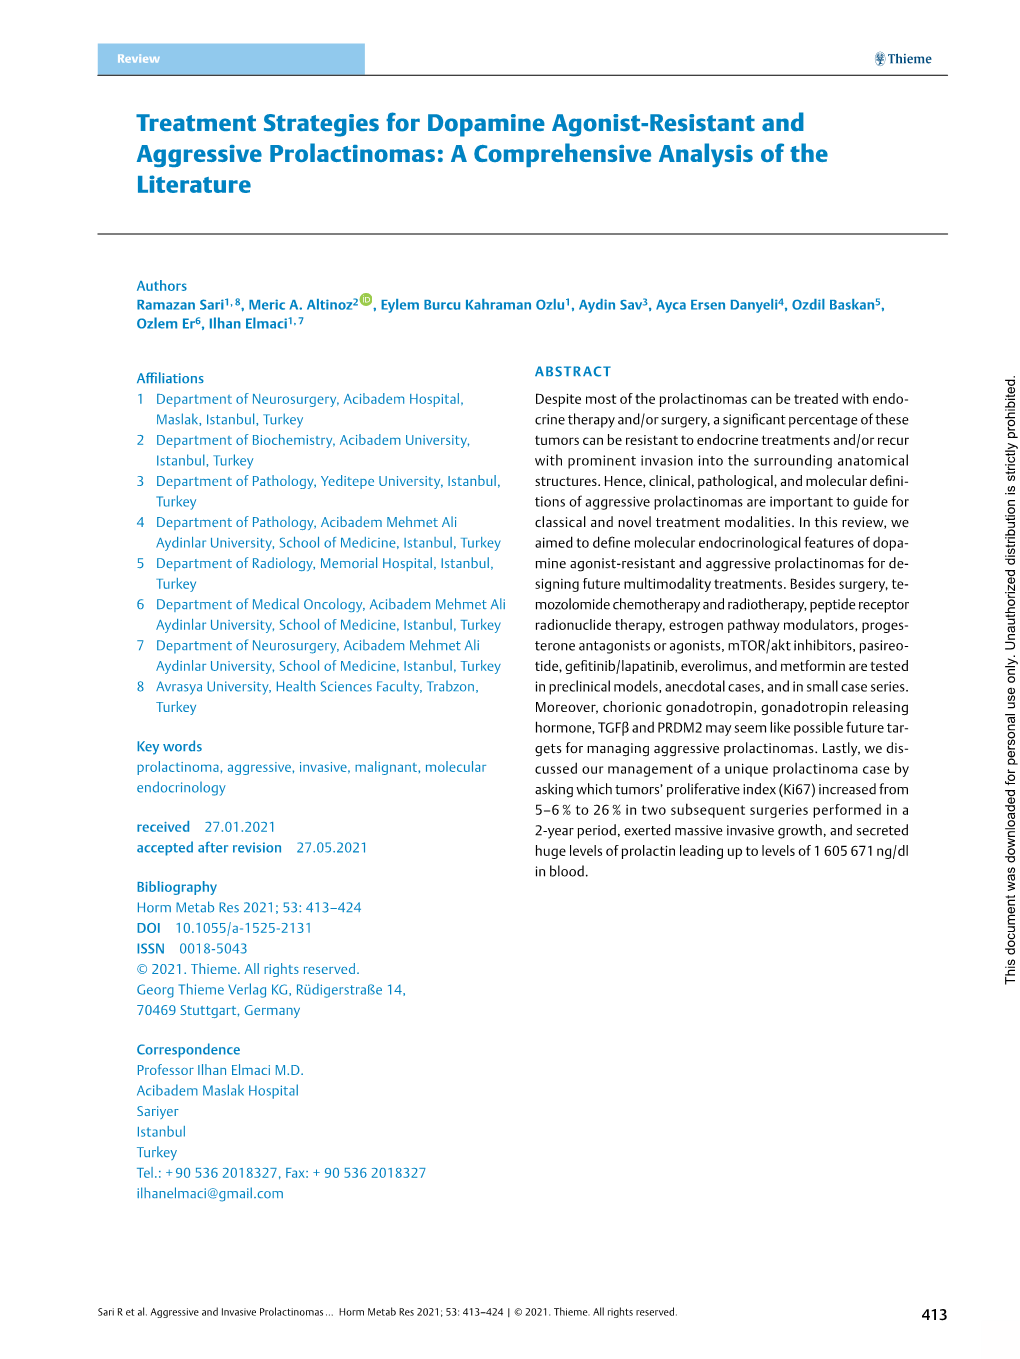 Treatment Strategies for Dopamine Agonist-Resistant and Aggressive Prolactinomas: a Comprehensive Analysis of the Literature